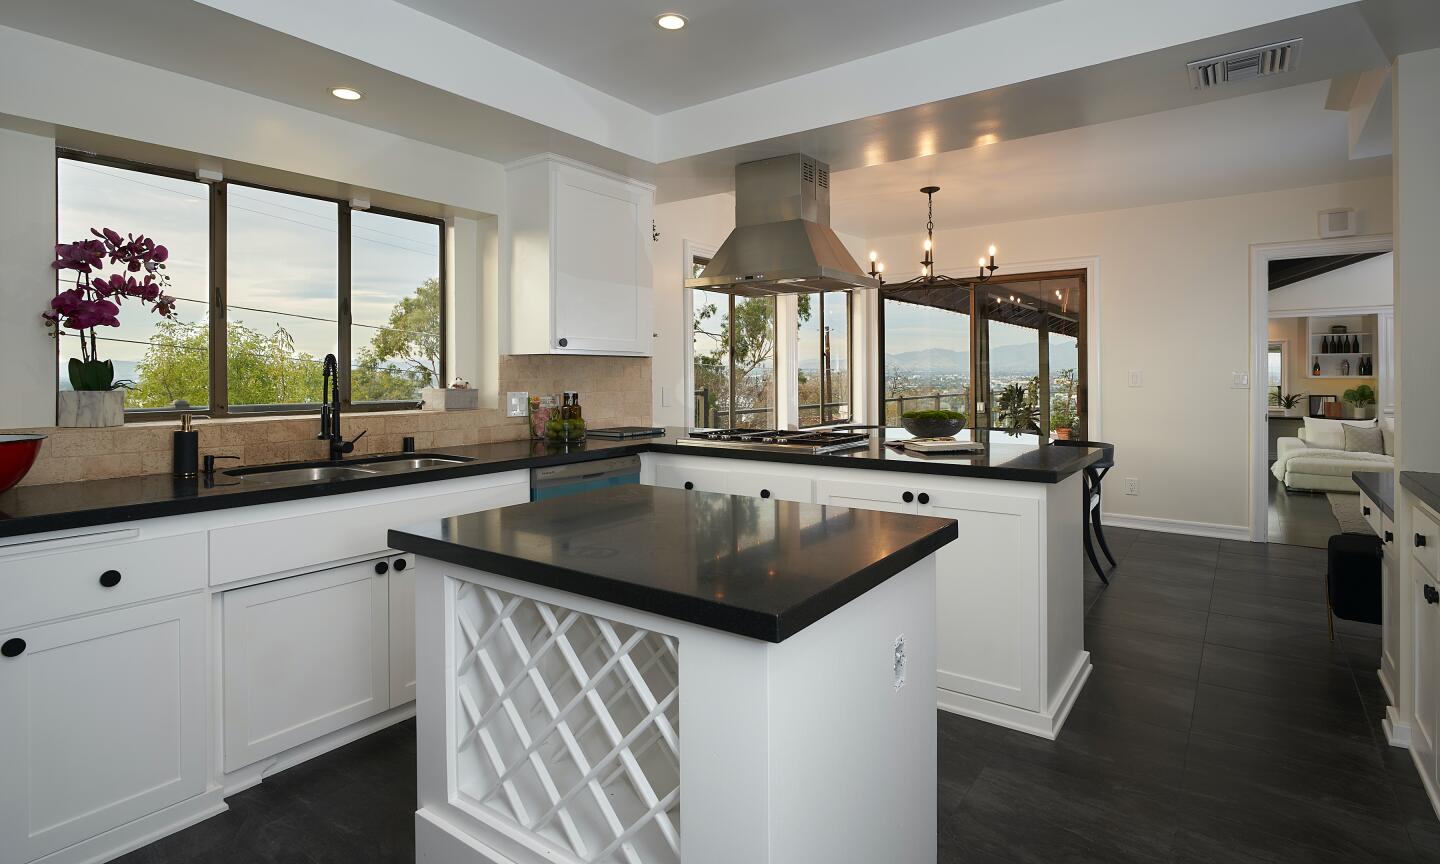 The kitchen has an island with built-in wine rack and recessed ceiling.